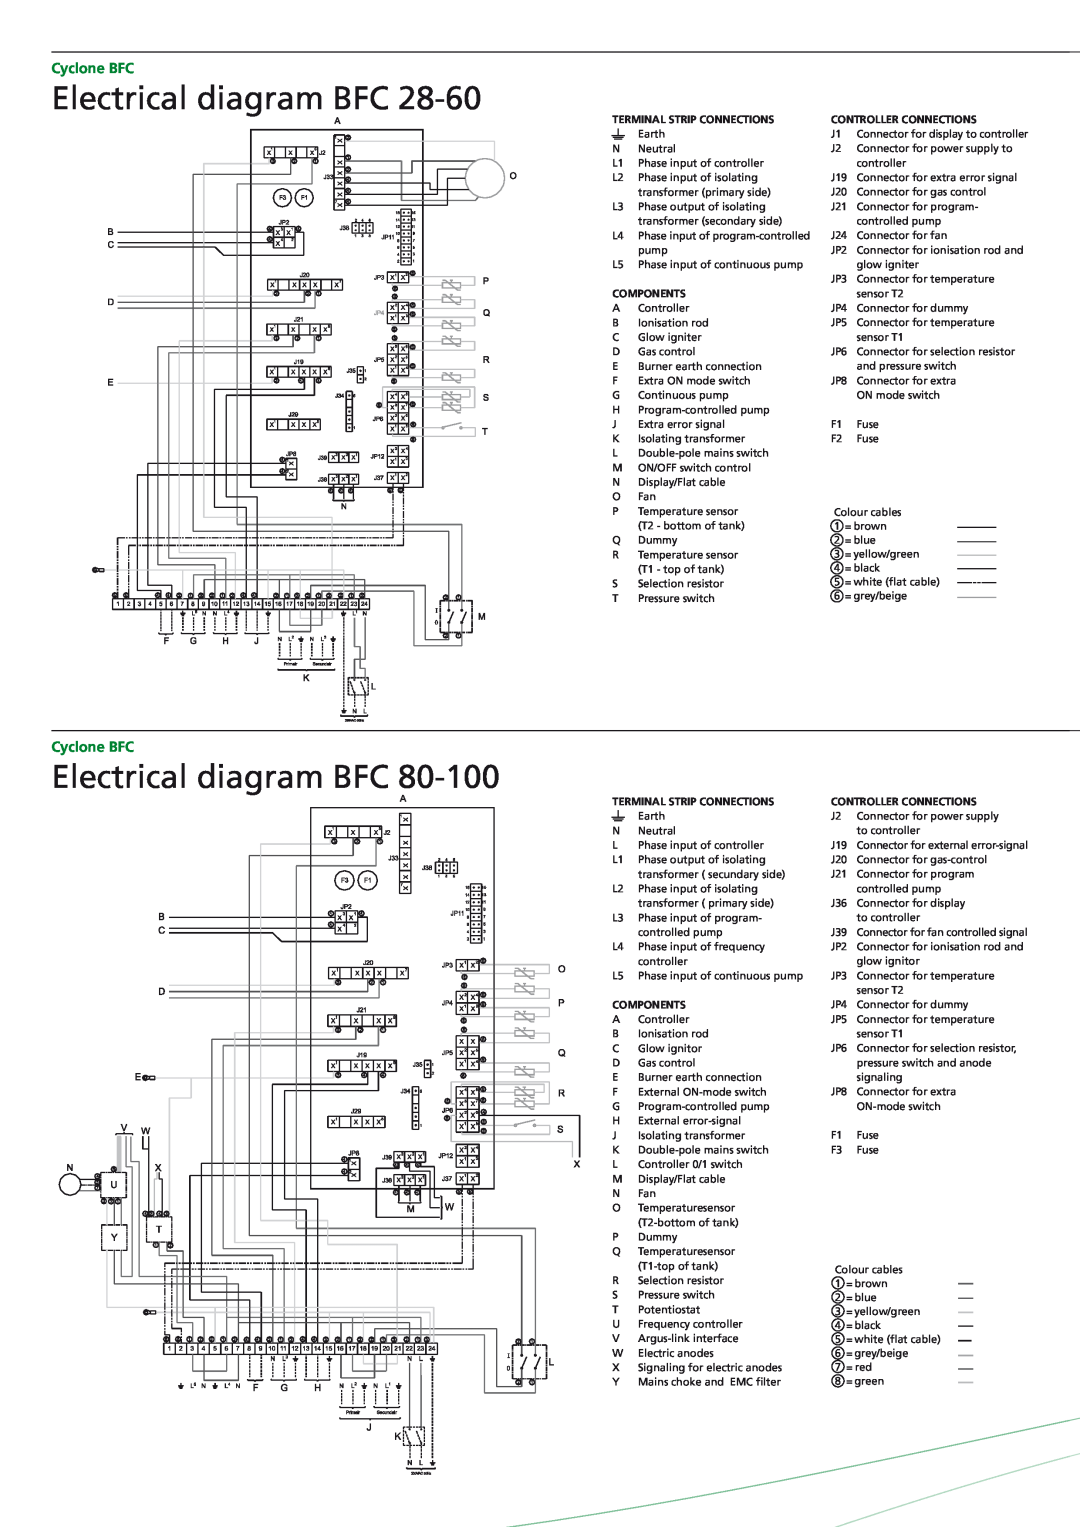 A.O. Smith BFC - 28 Electrical diagram BFC, Cyclone BFC, Terminal Strip Connections, Controller Connections, Components 